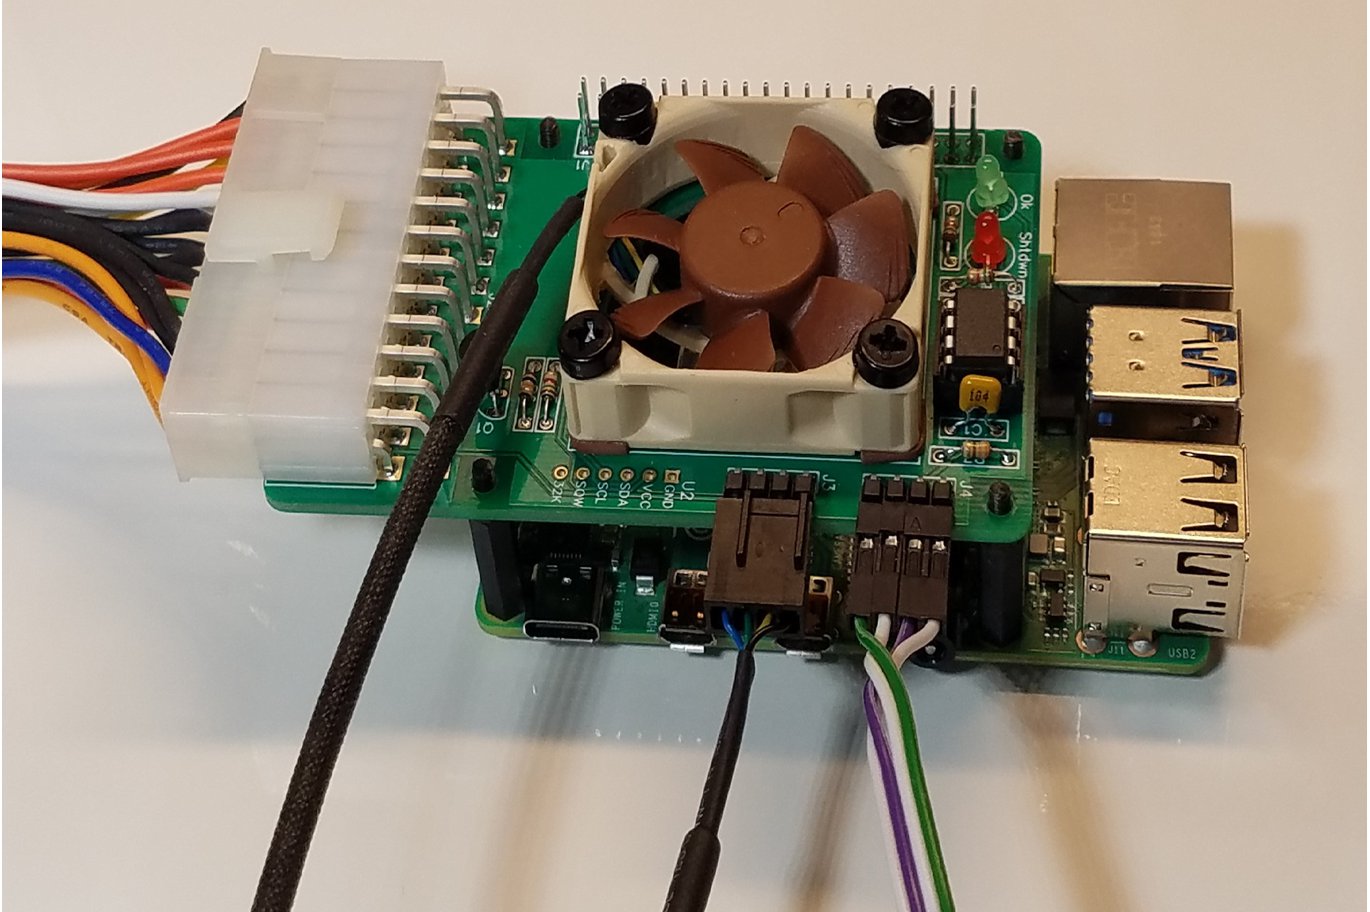 Pod Bay 3’s PiRyte Brings ATX Power and Active Cooling to the Raspberry Pi Family